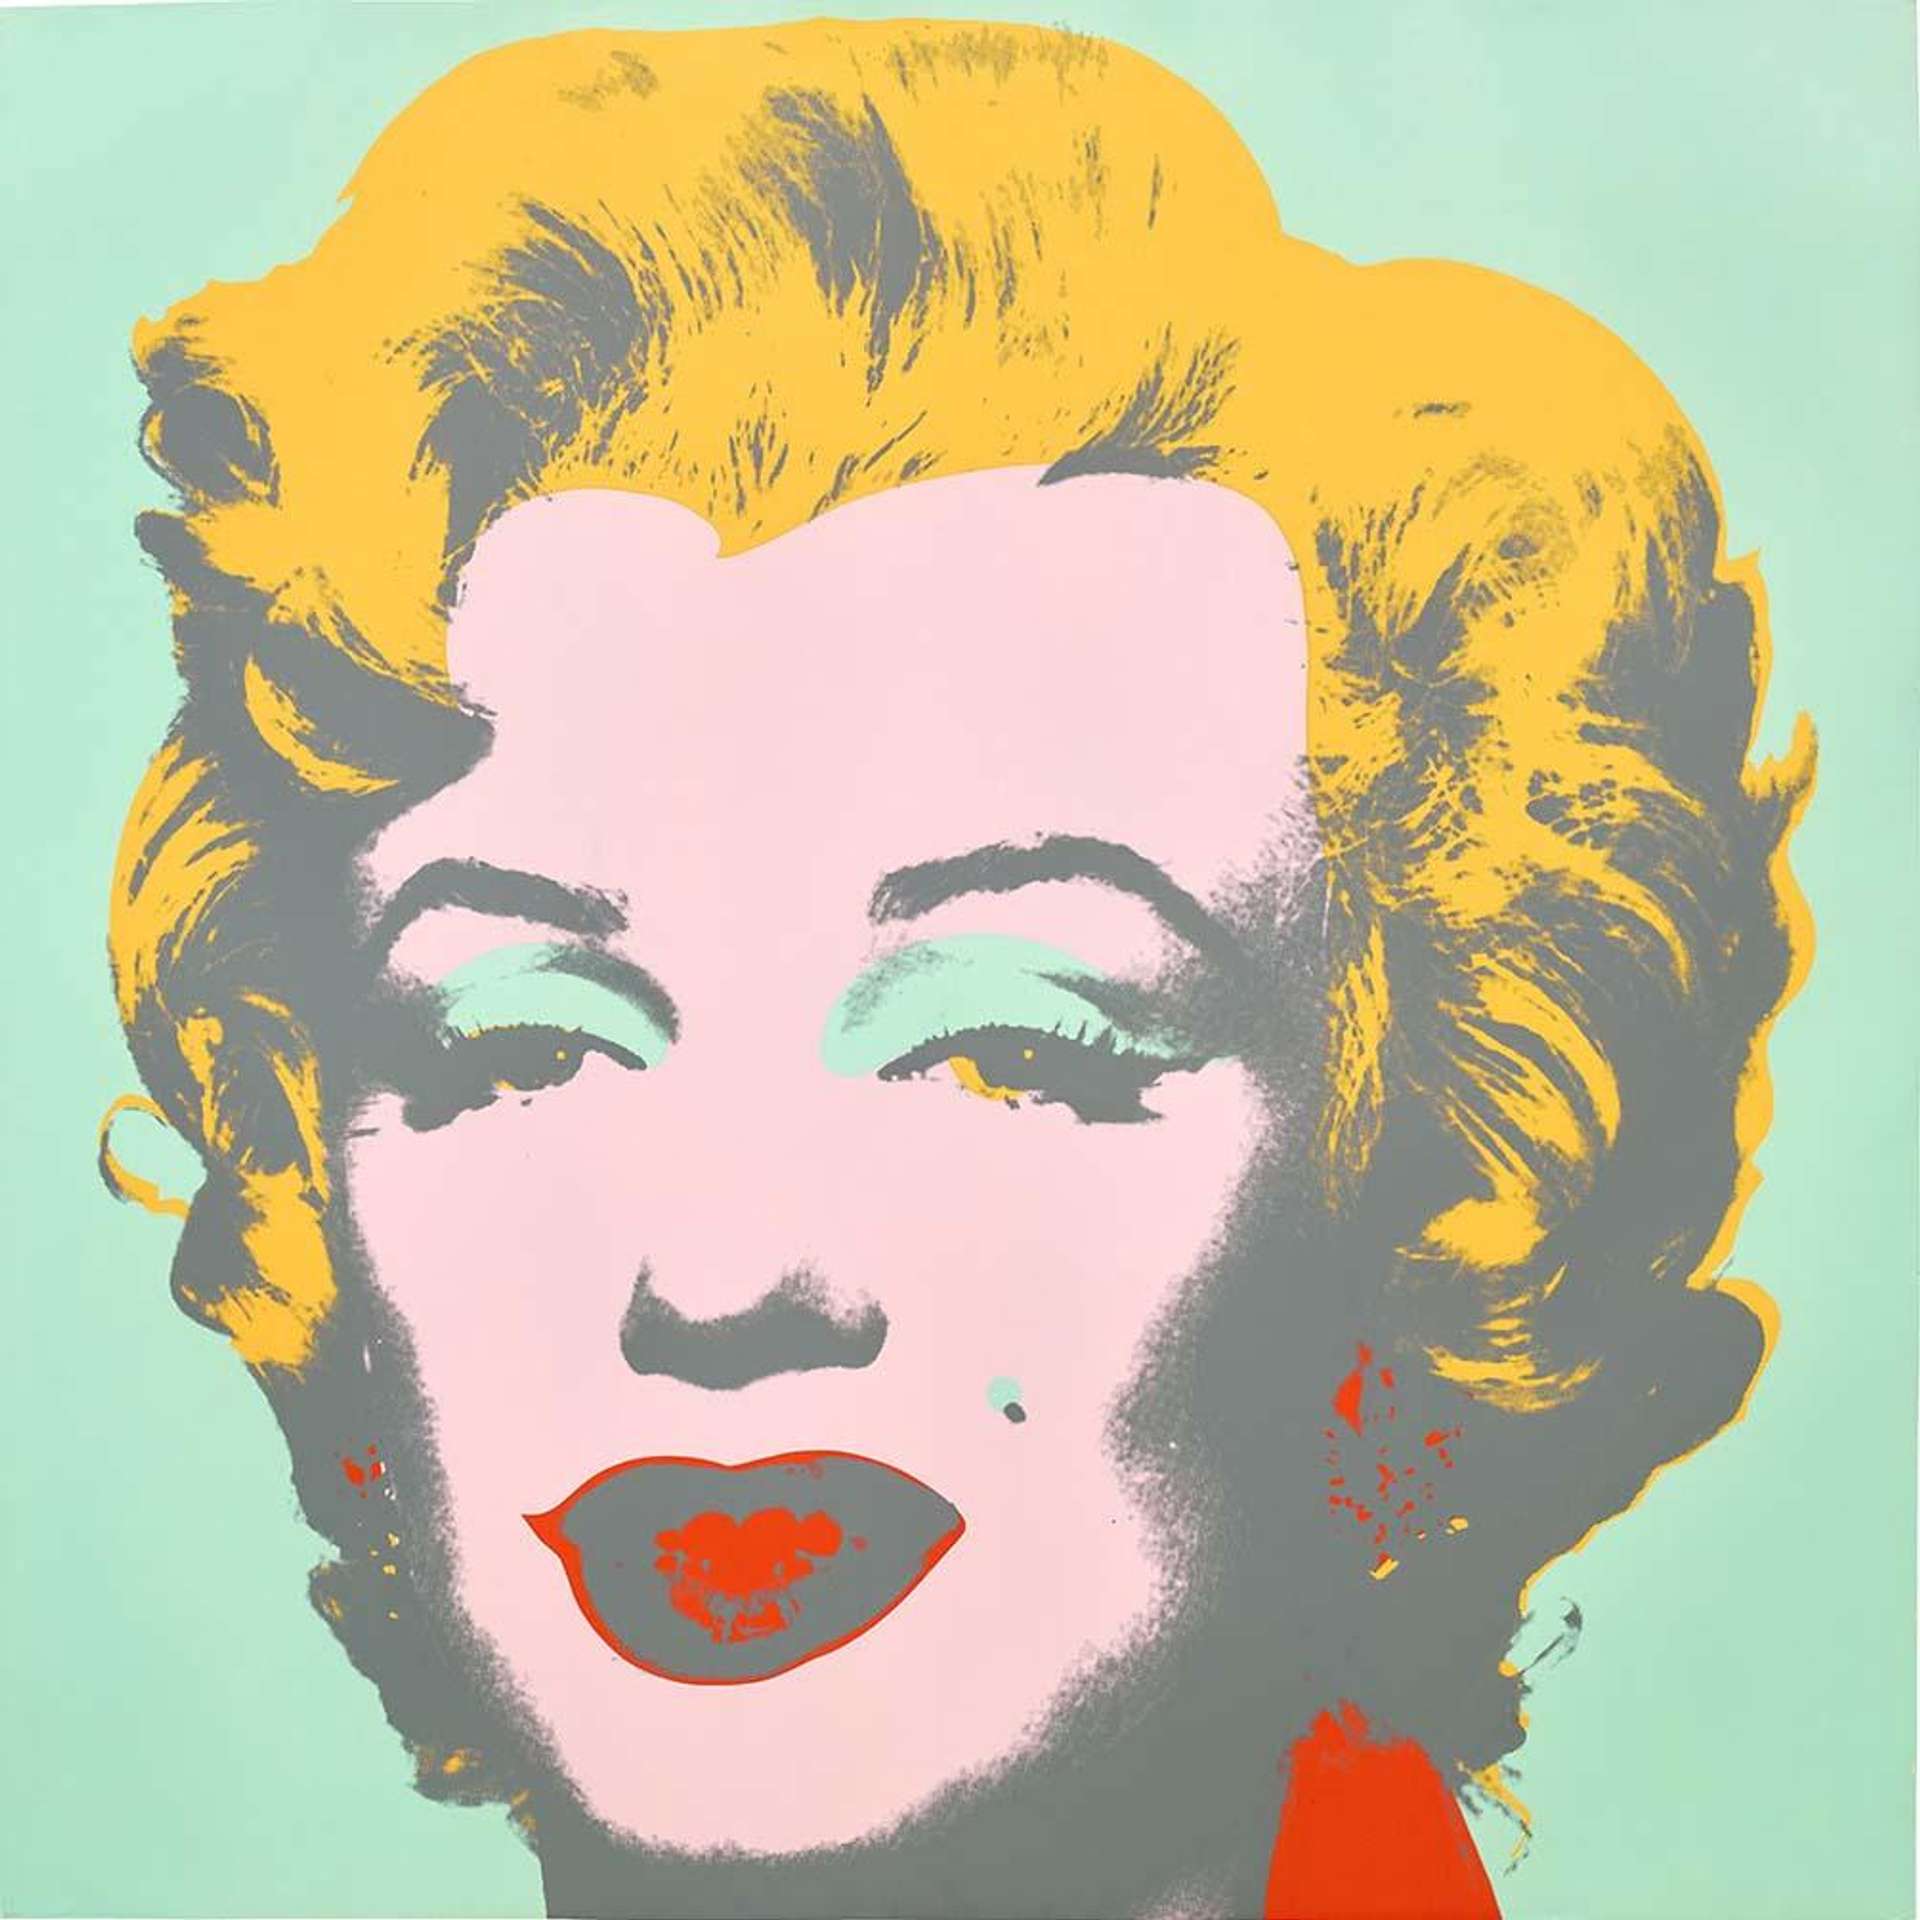 The print  shows a portrait of the starred celebrity actress Marilyn Monroe, shown with a pale pink face, bright red lips, yellow hair and inner eyes, and a light green tone colouring her eyelids, her iconic beauty mark and the backdrop.